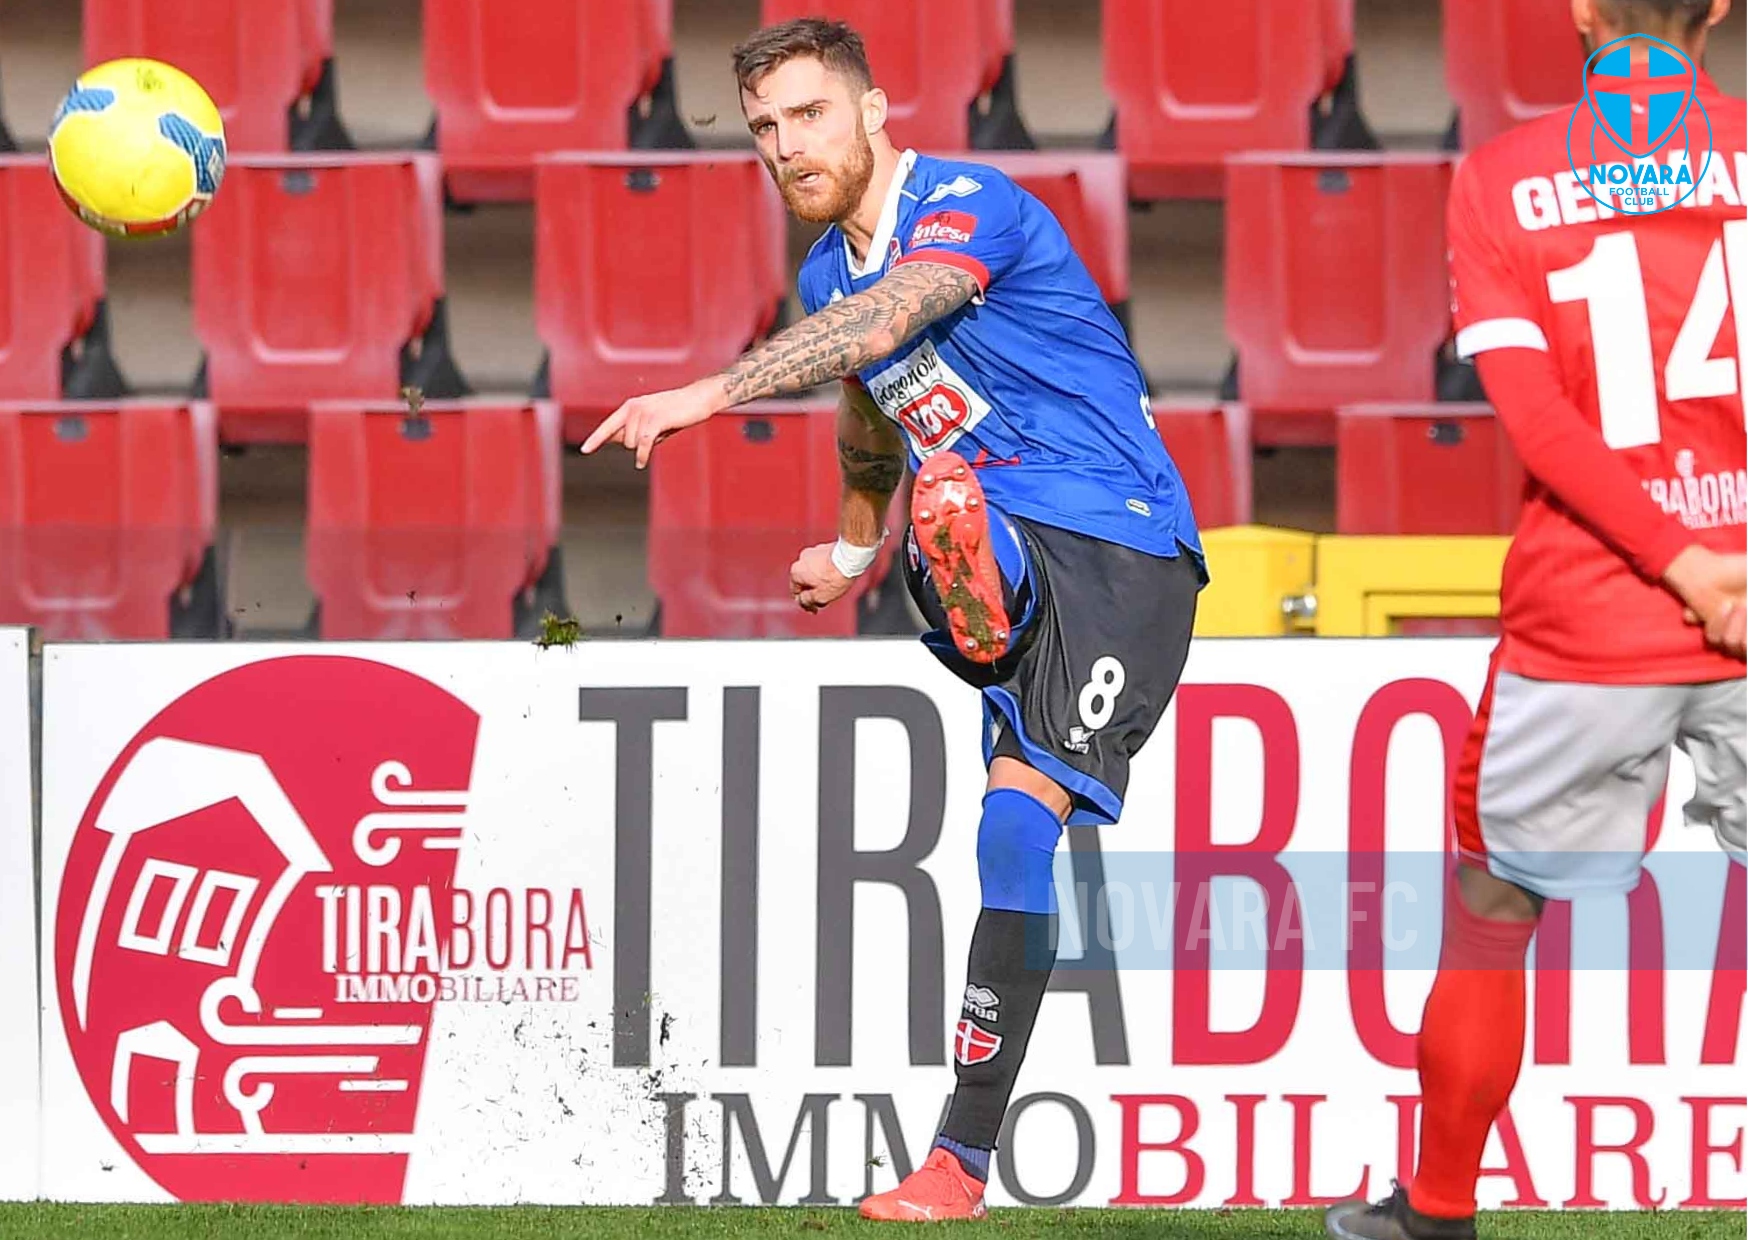 Read more about the article Triestina-Novara 2-0 | Gallery